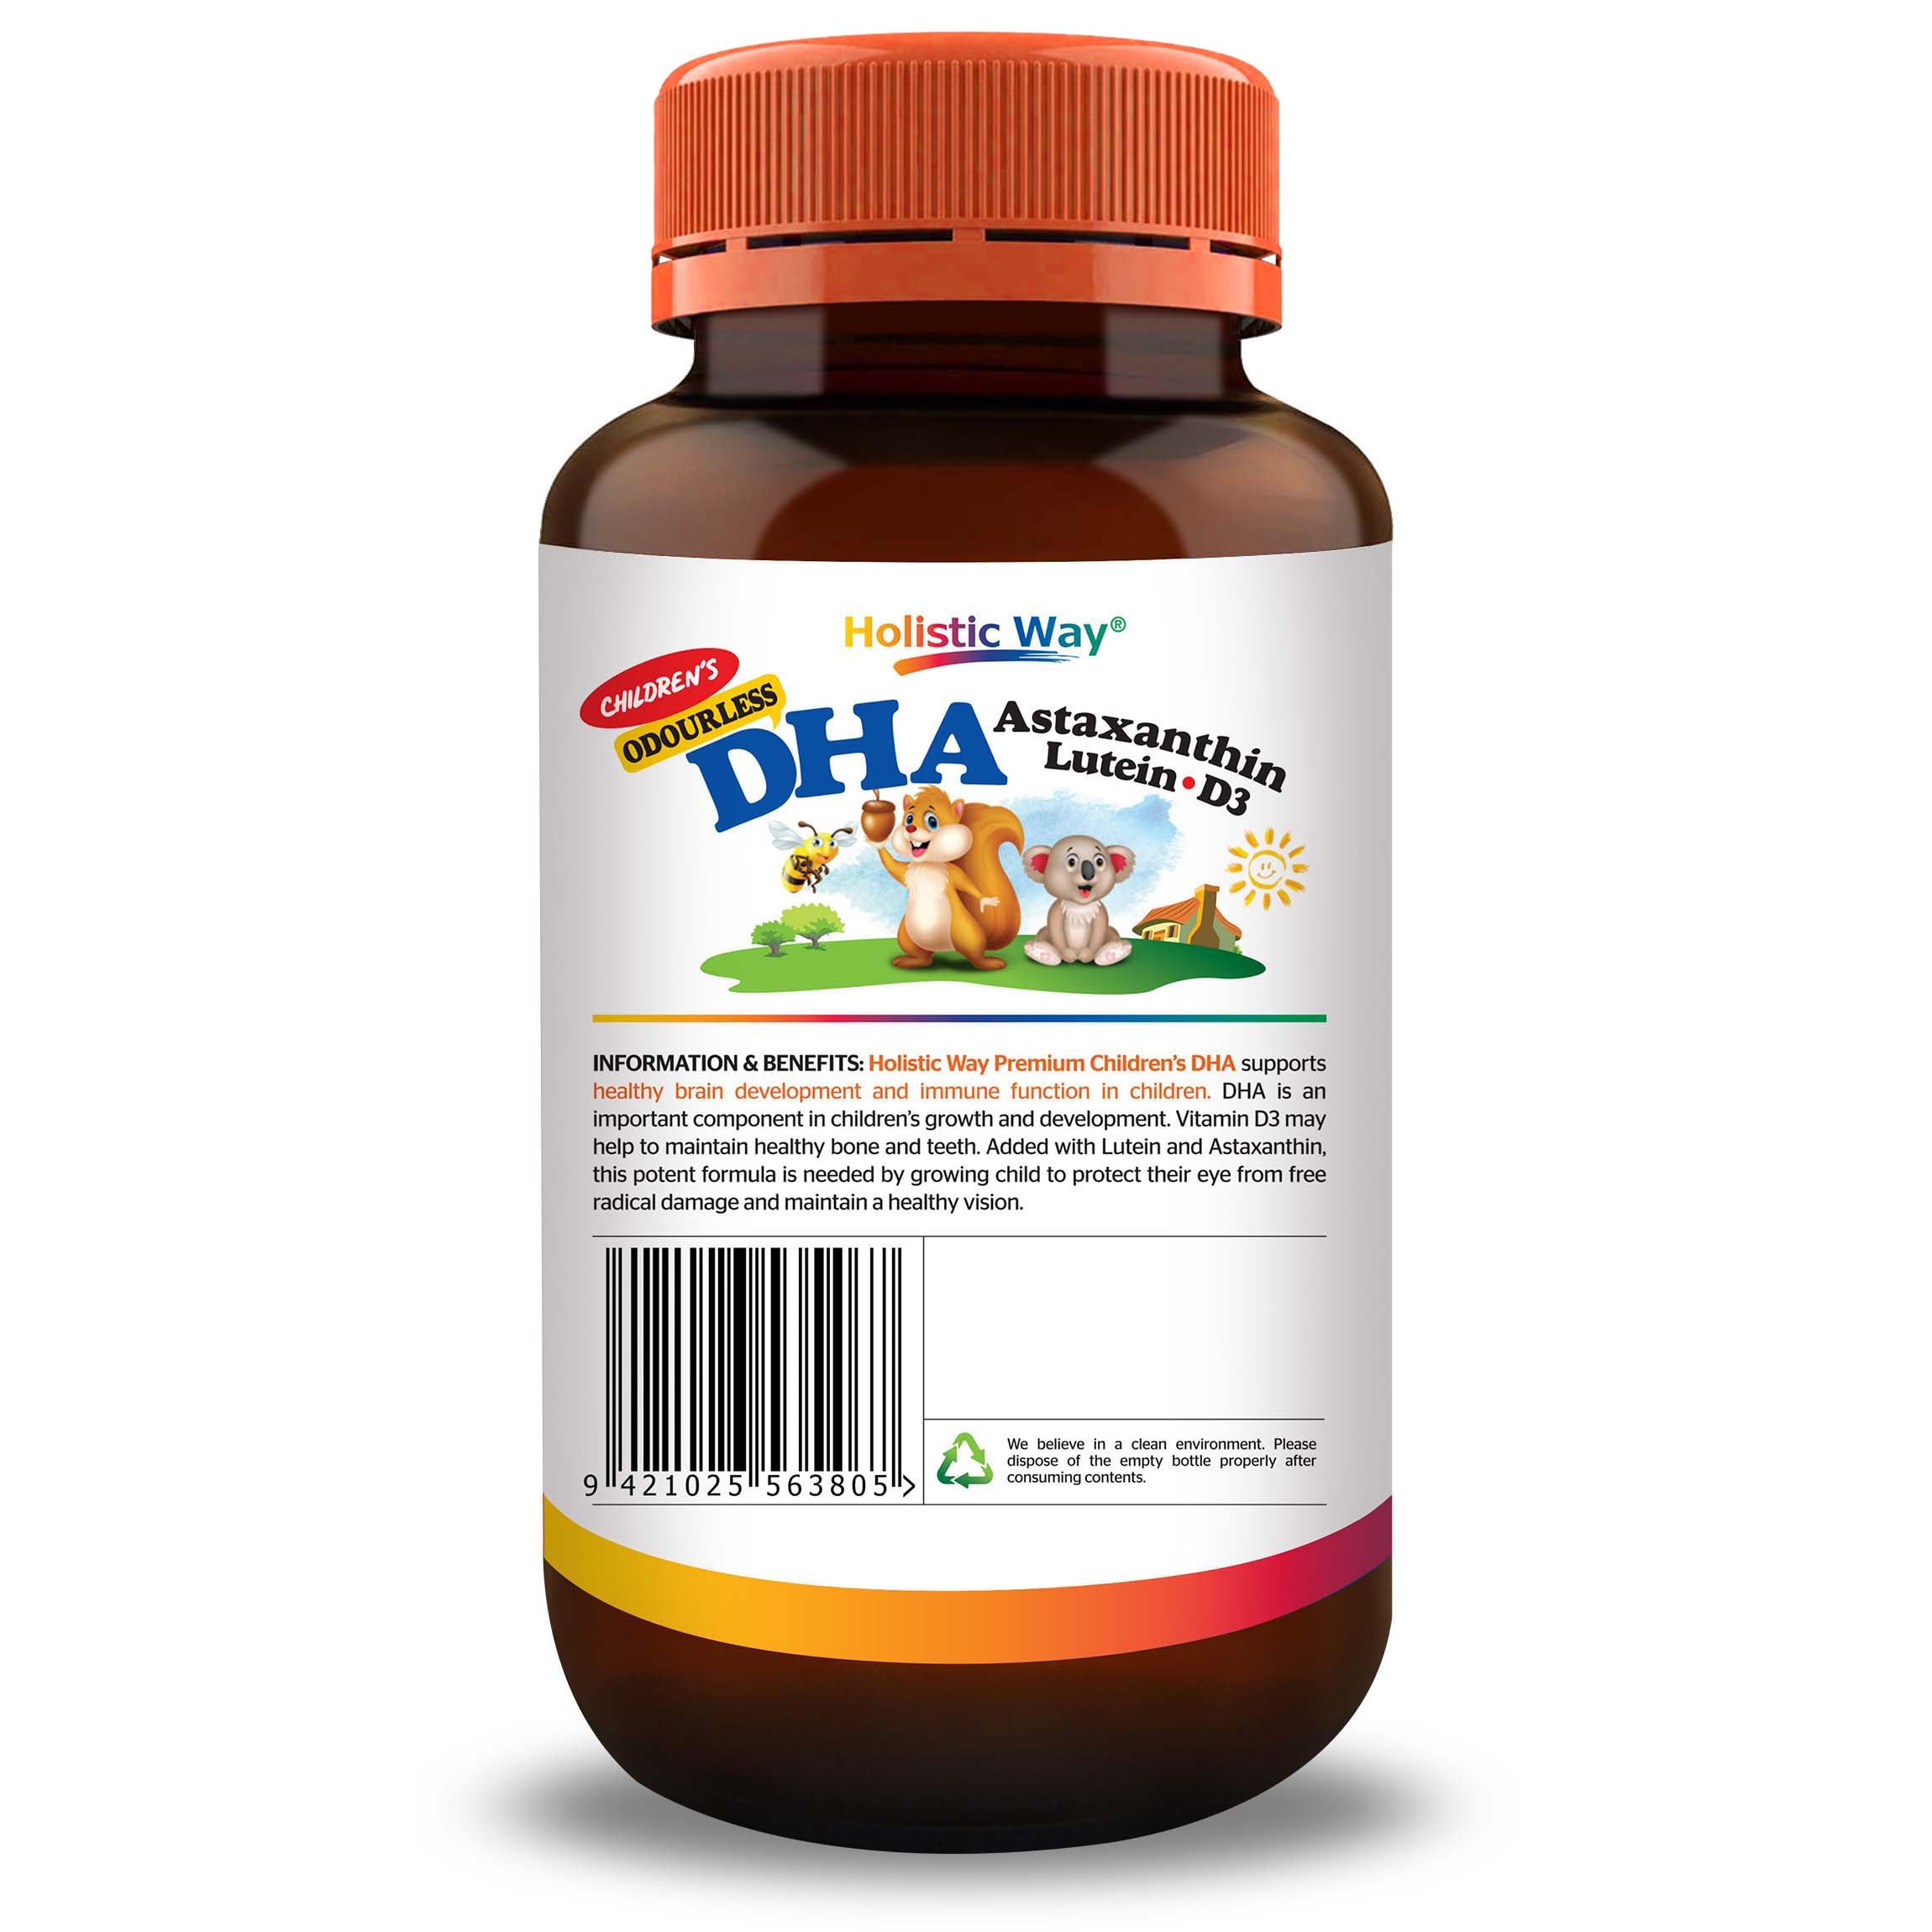 Holistic Way Premium Children’s DHA and Lutein (60 Softgels)